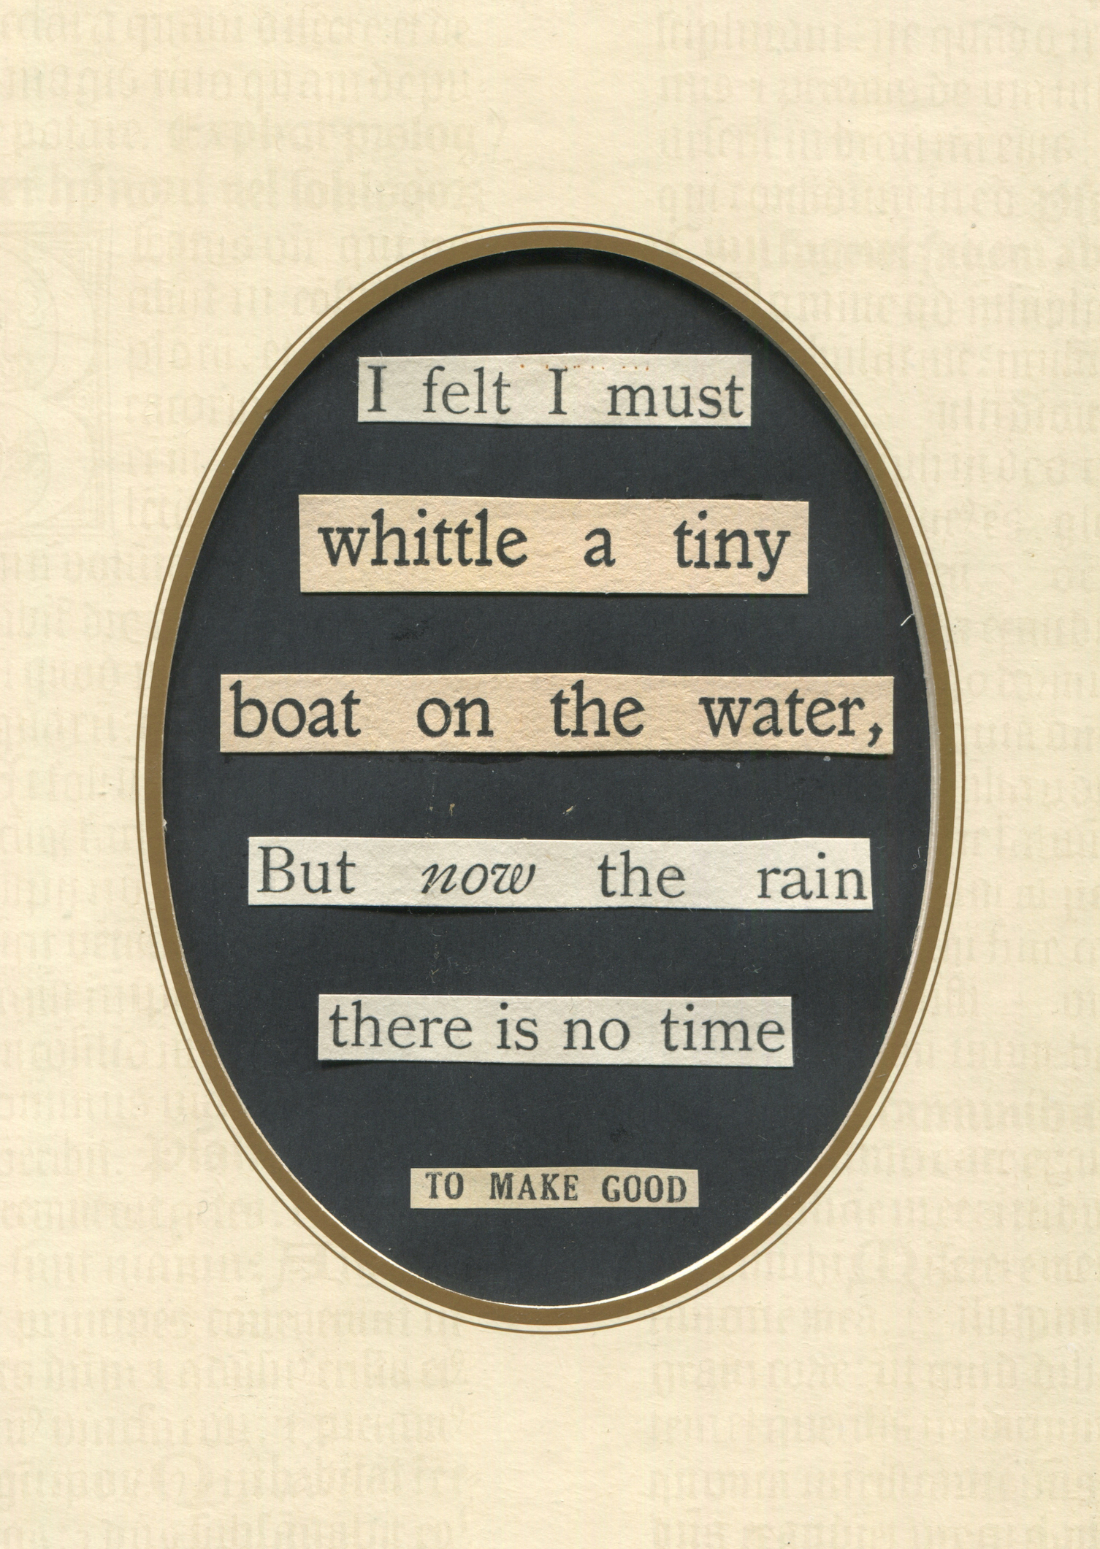 pasted words in an oval that say I felt I must whittle a tiny 
        			boat on the water But now the rain there is no time to make good